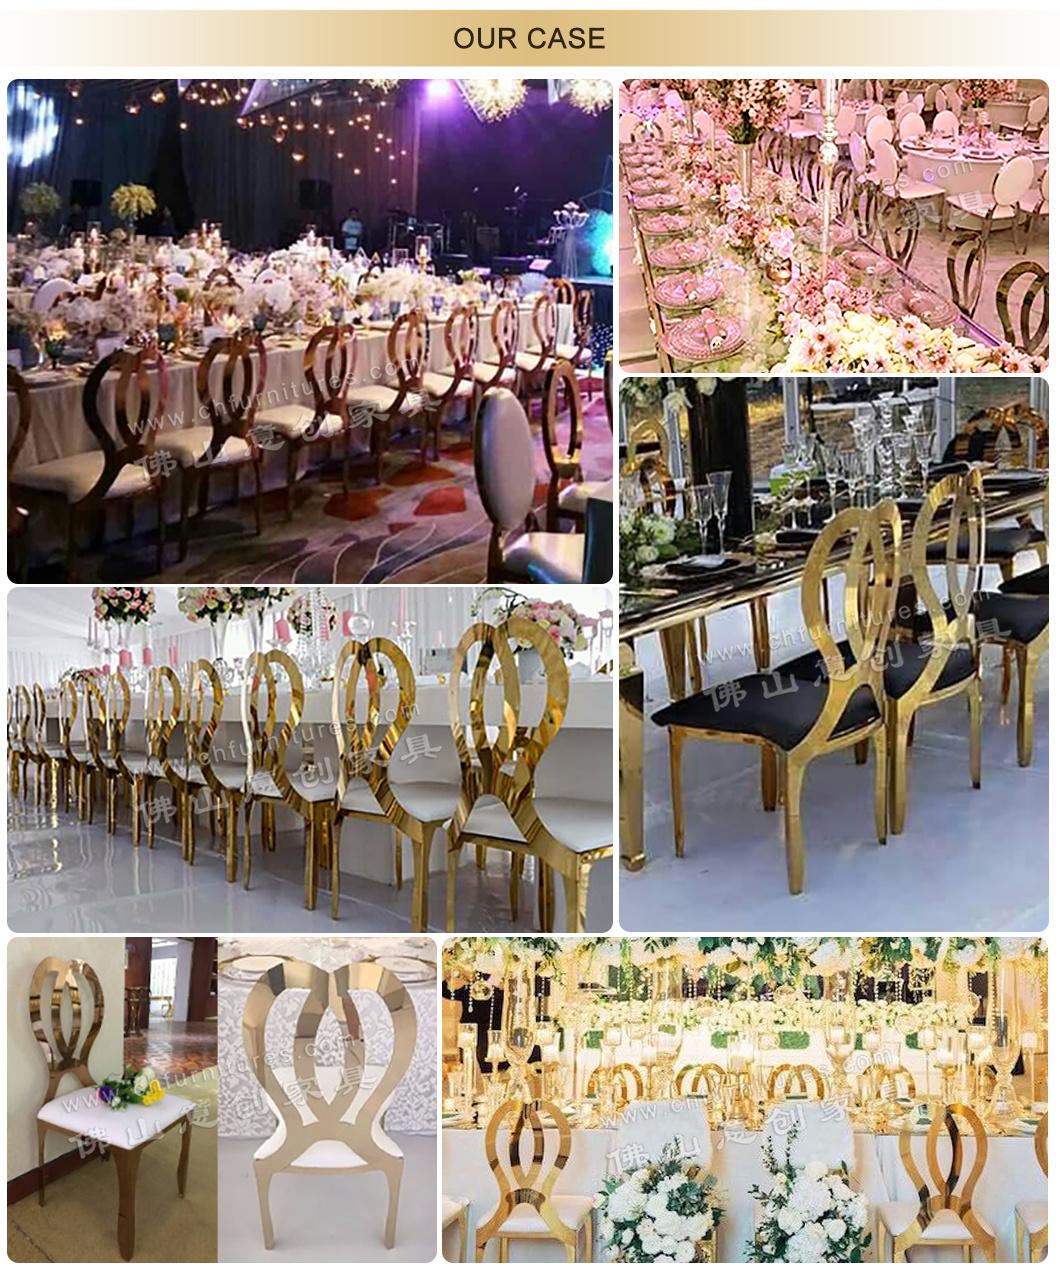 Ycx-Ss50 Modern Gold Stainless Steel Dining Chair for Wedding